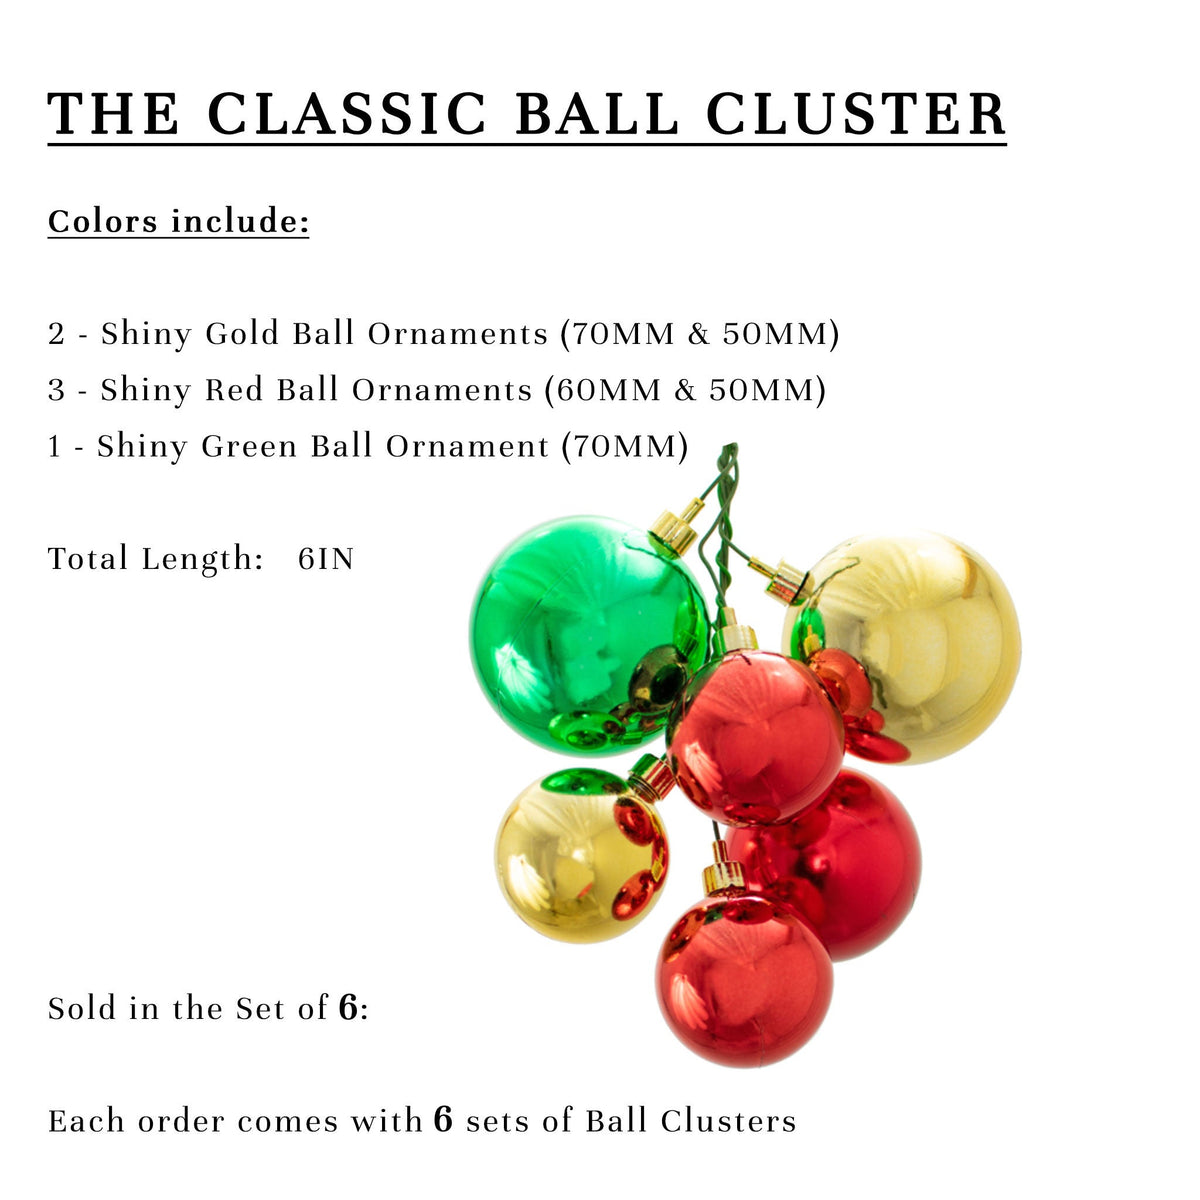 Description of the Classic Shiny Red, Gold, and Green Ball Ornament Cluster